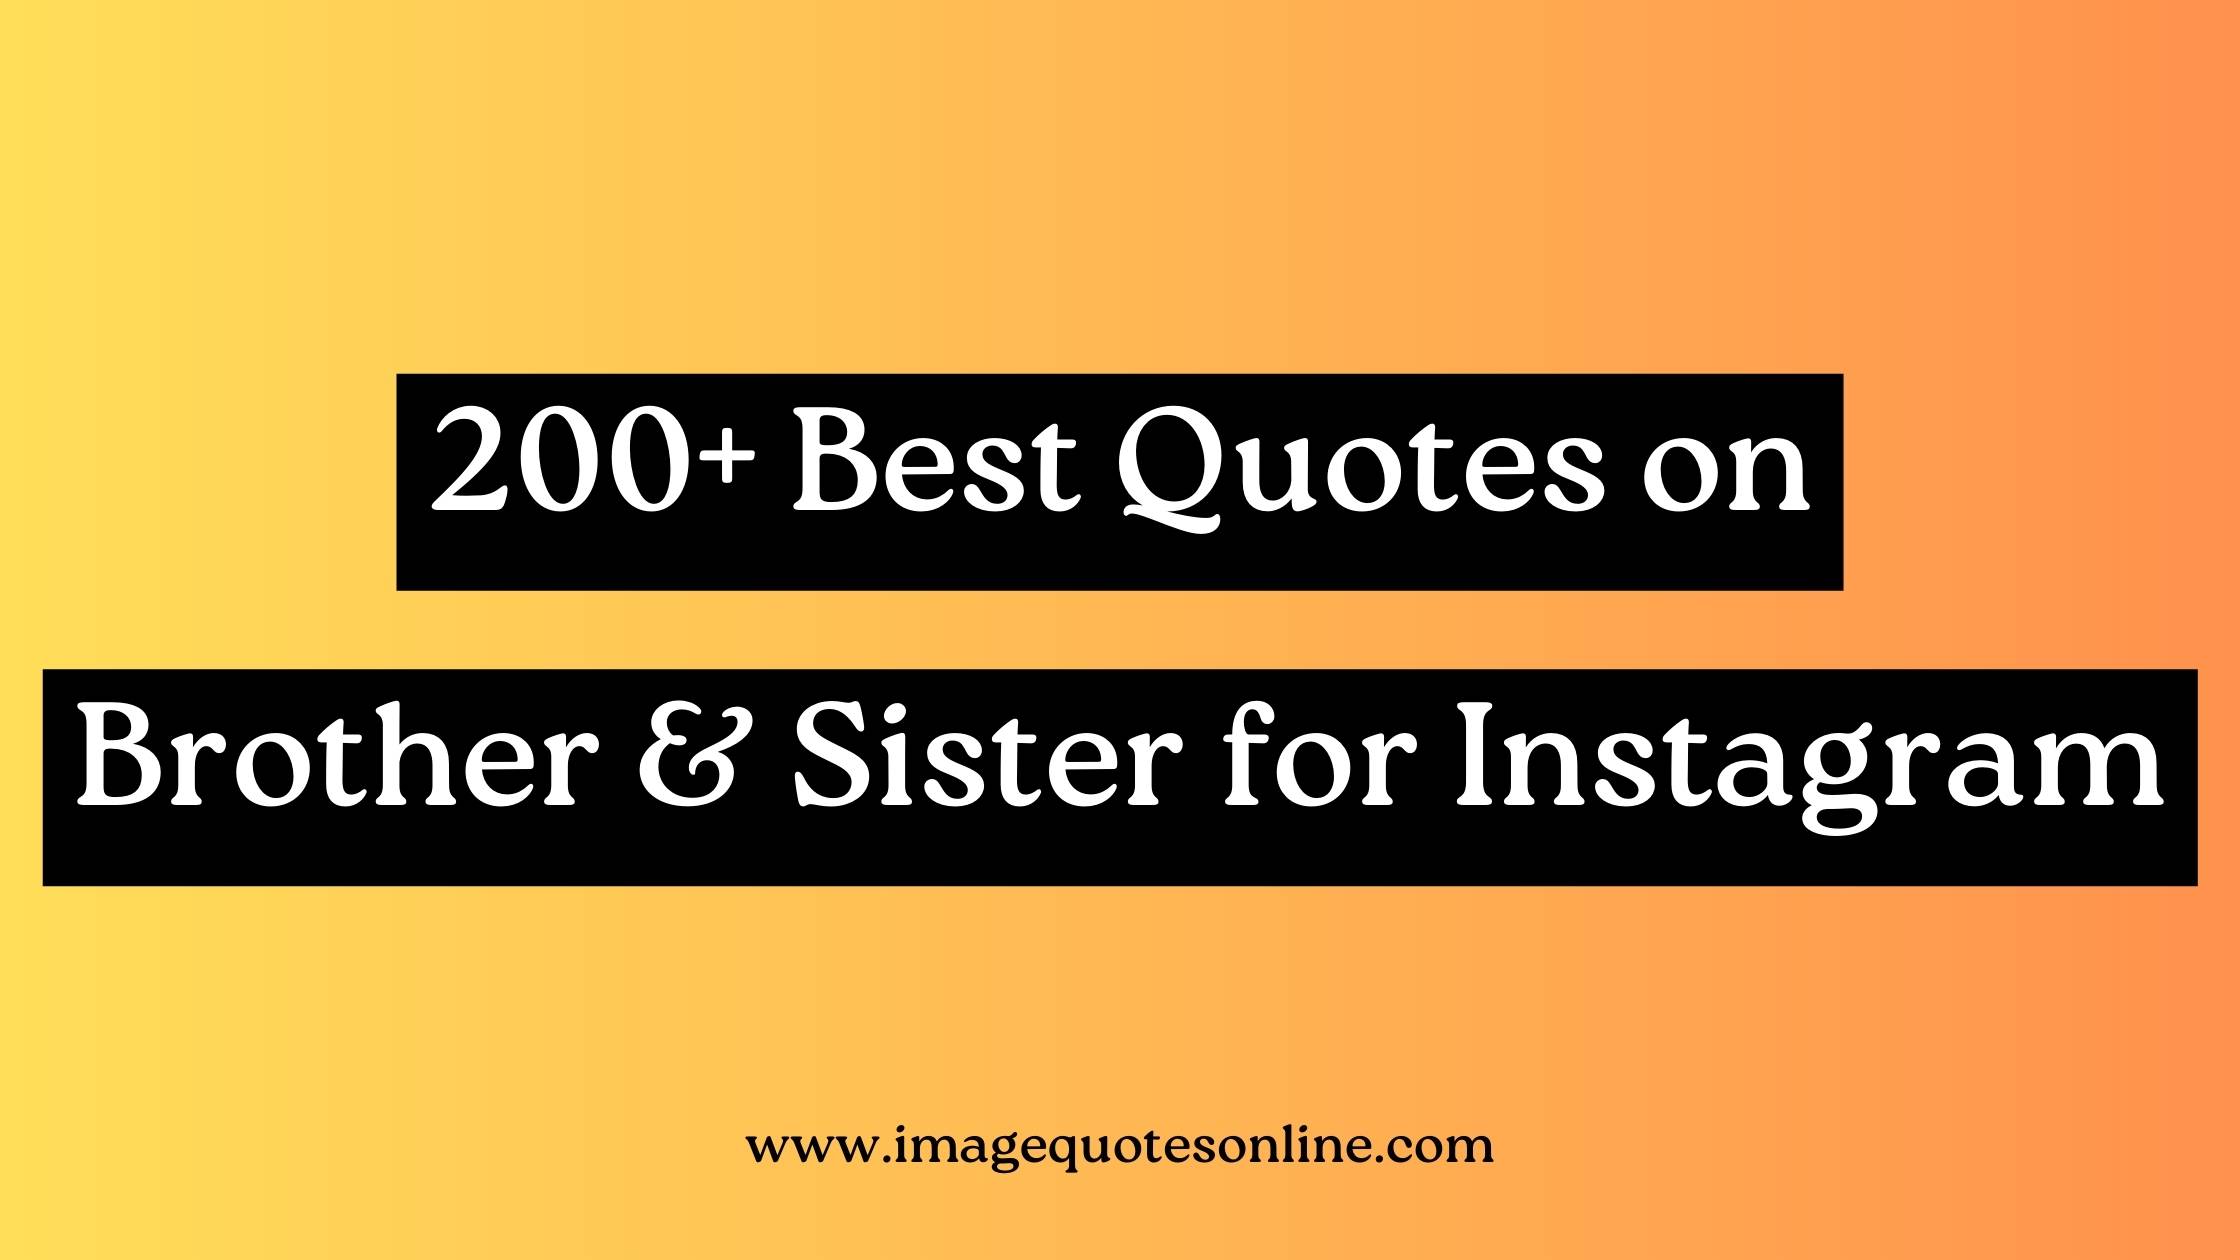 brother and sister quotes for Instagram